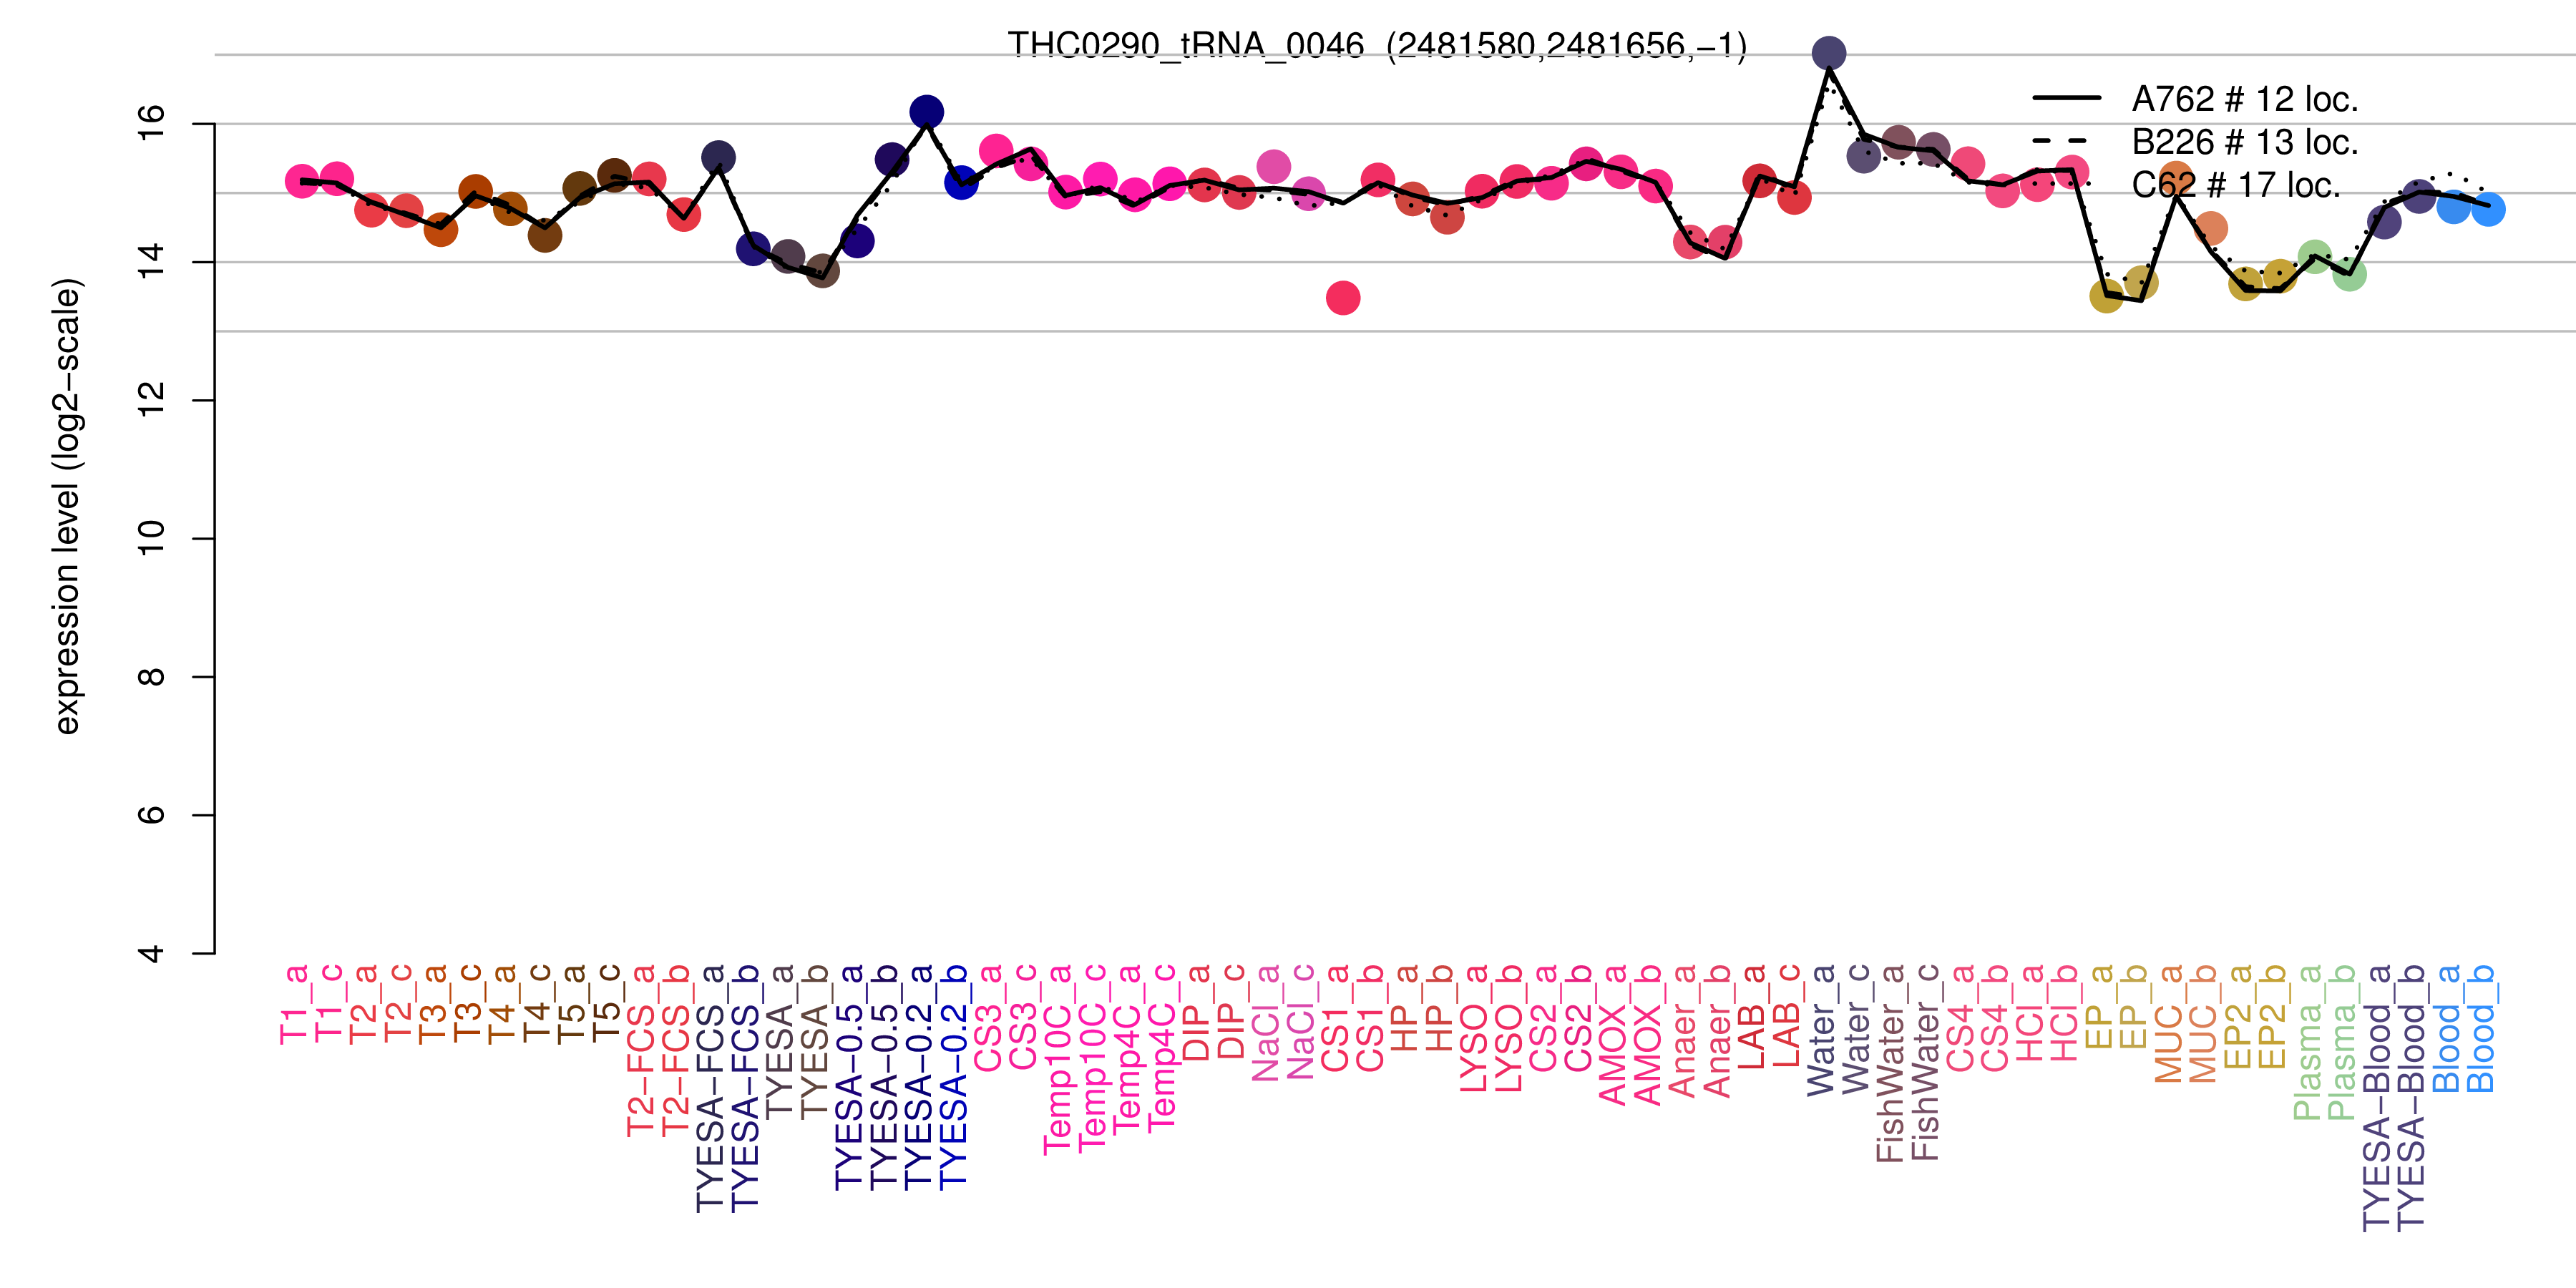 THC0290_tRNA_0046 expression levels among conditions